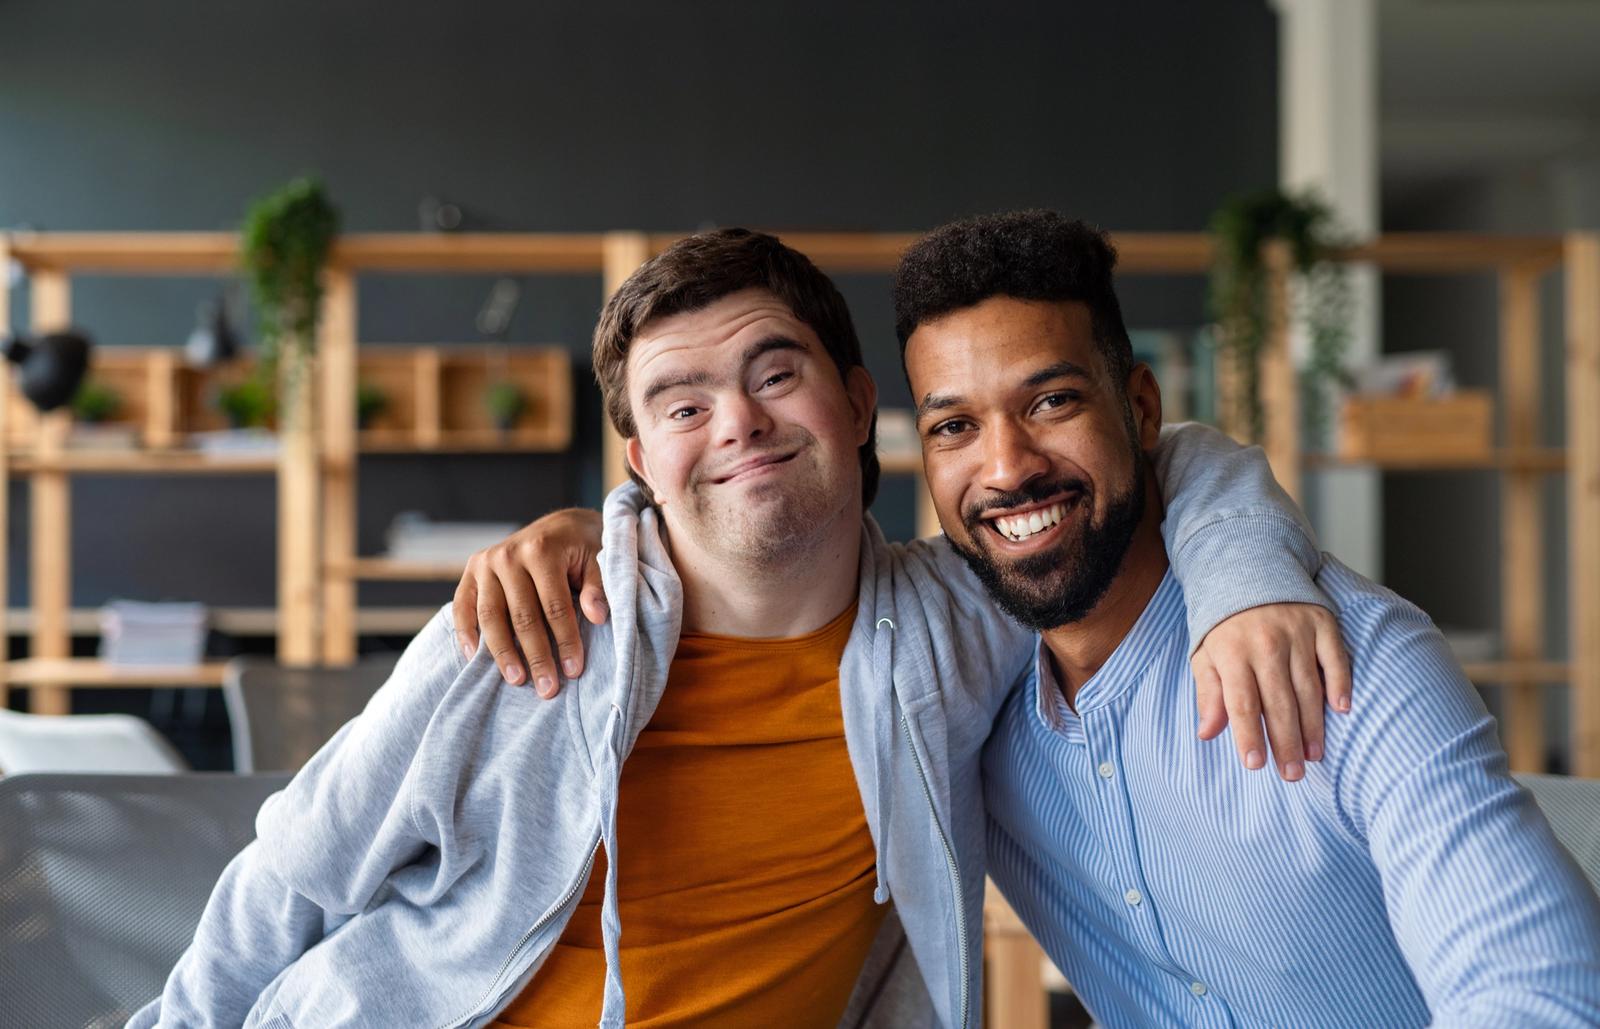 A young man with Down syndrome and a man without Down syndrome with their arms around each others' shoulders